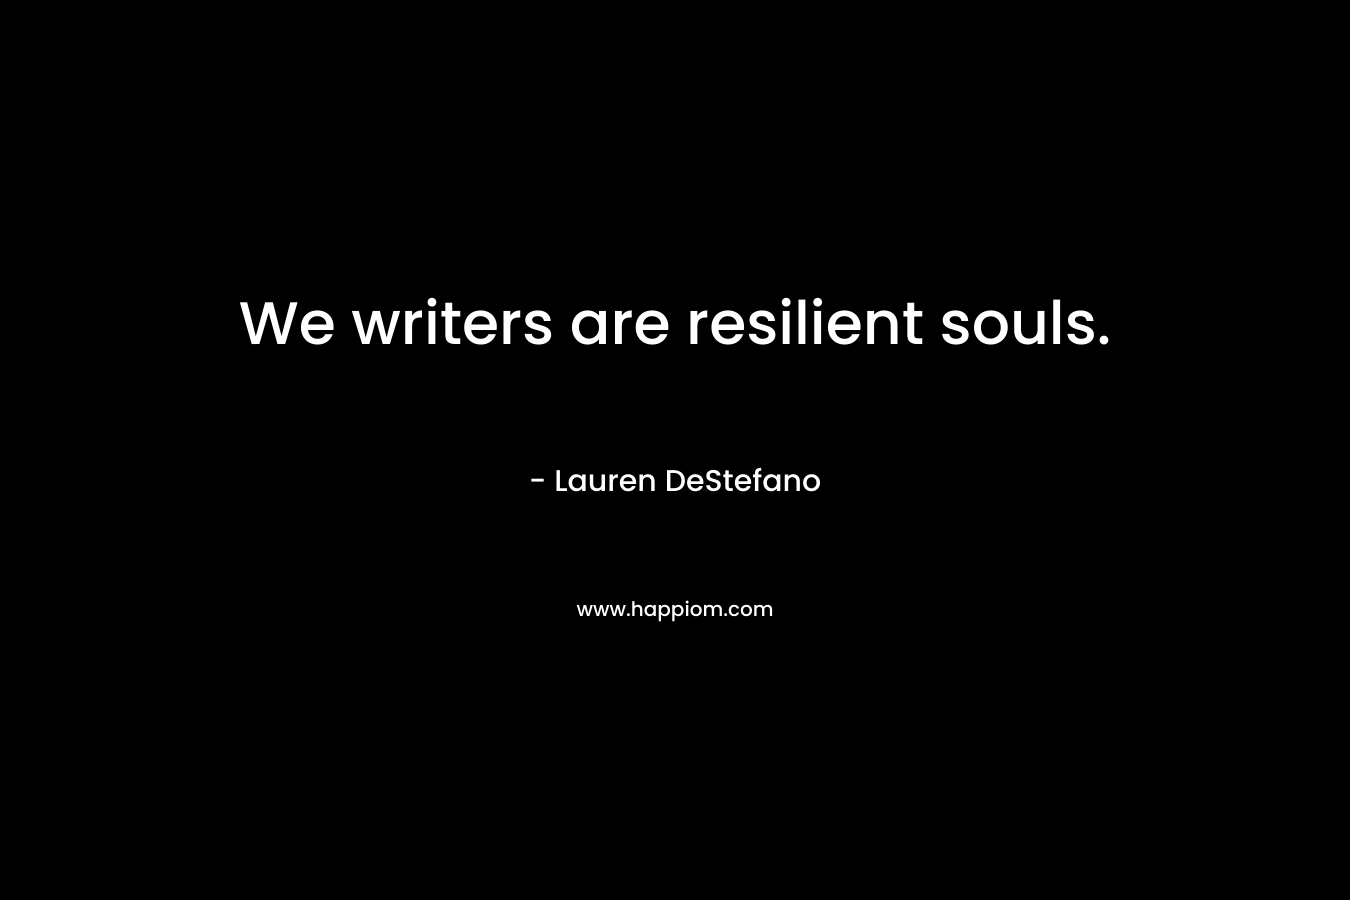 We writers are resilient souls.